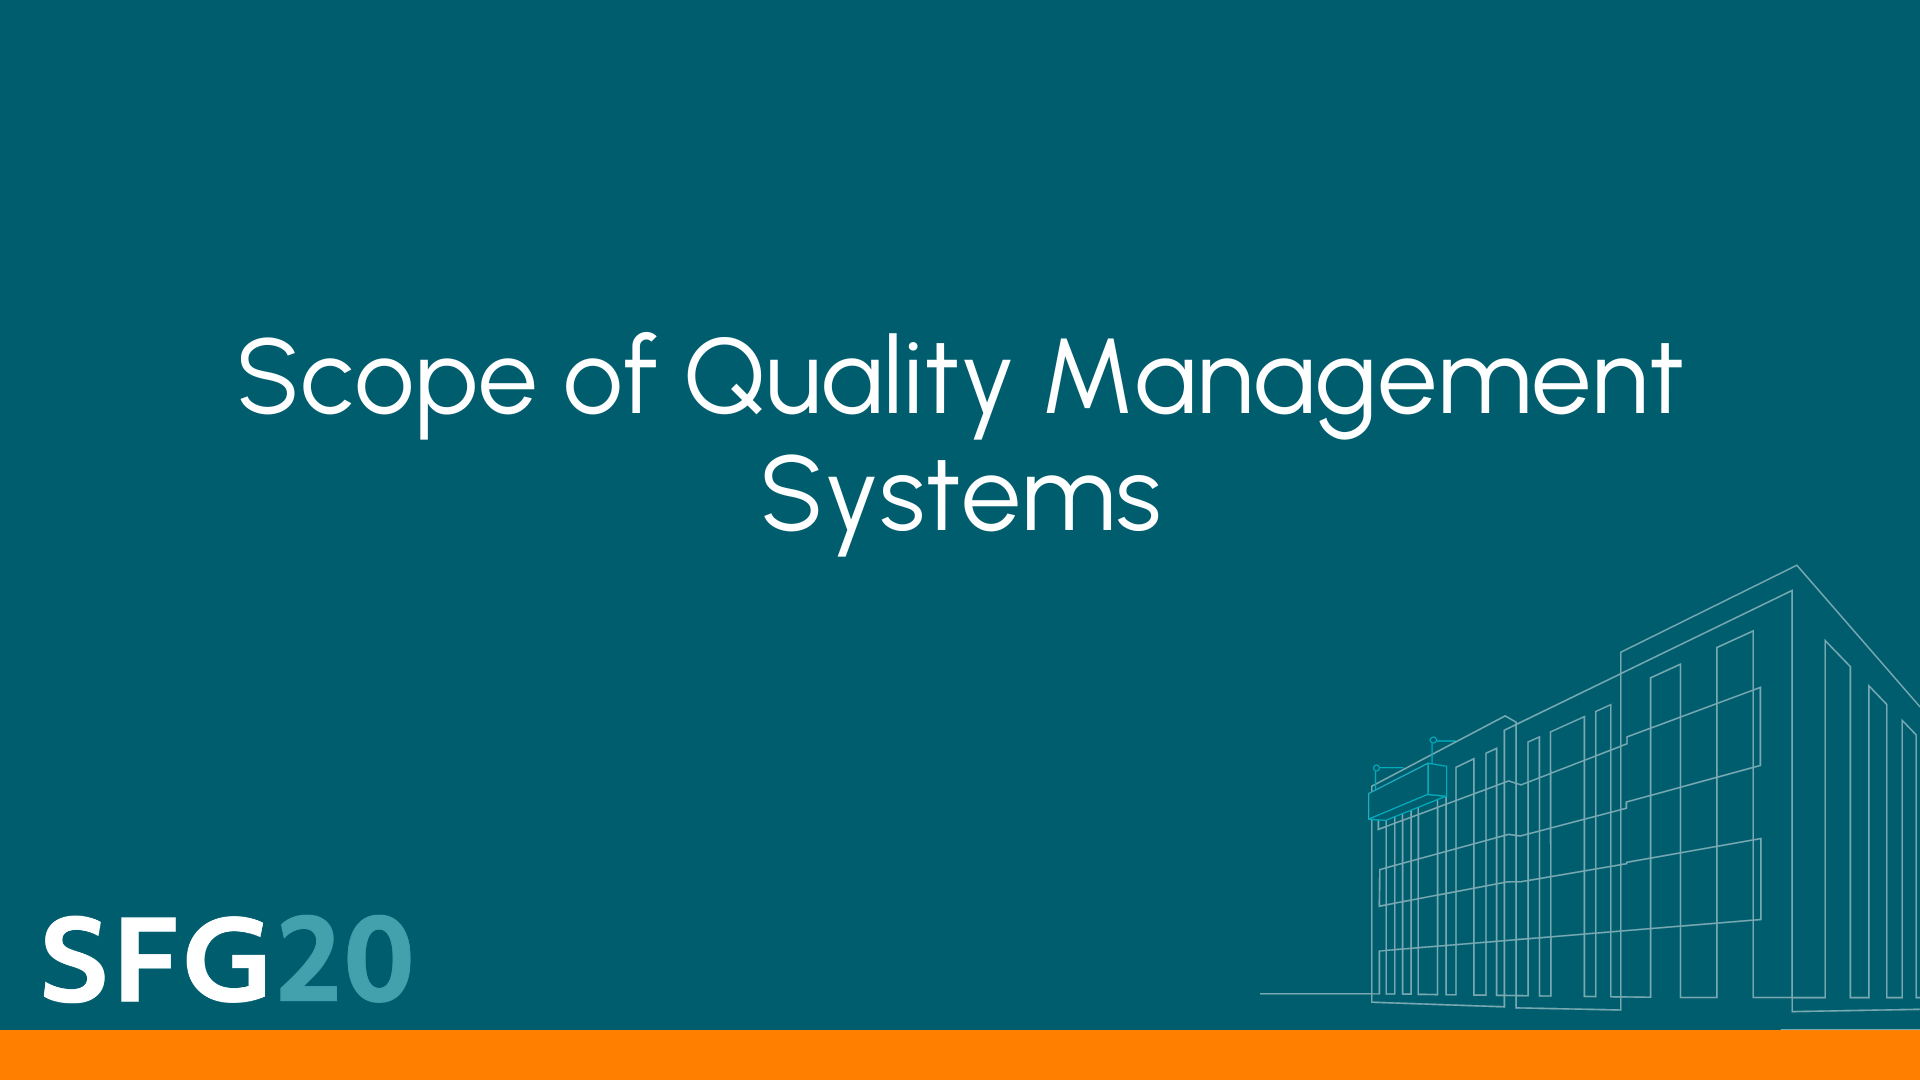 Scope of Quality Management Systems